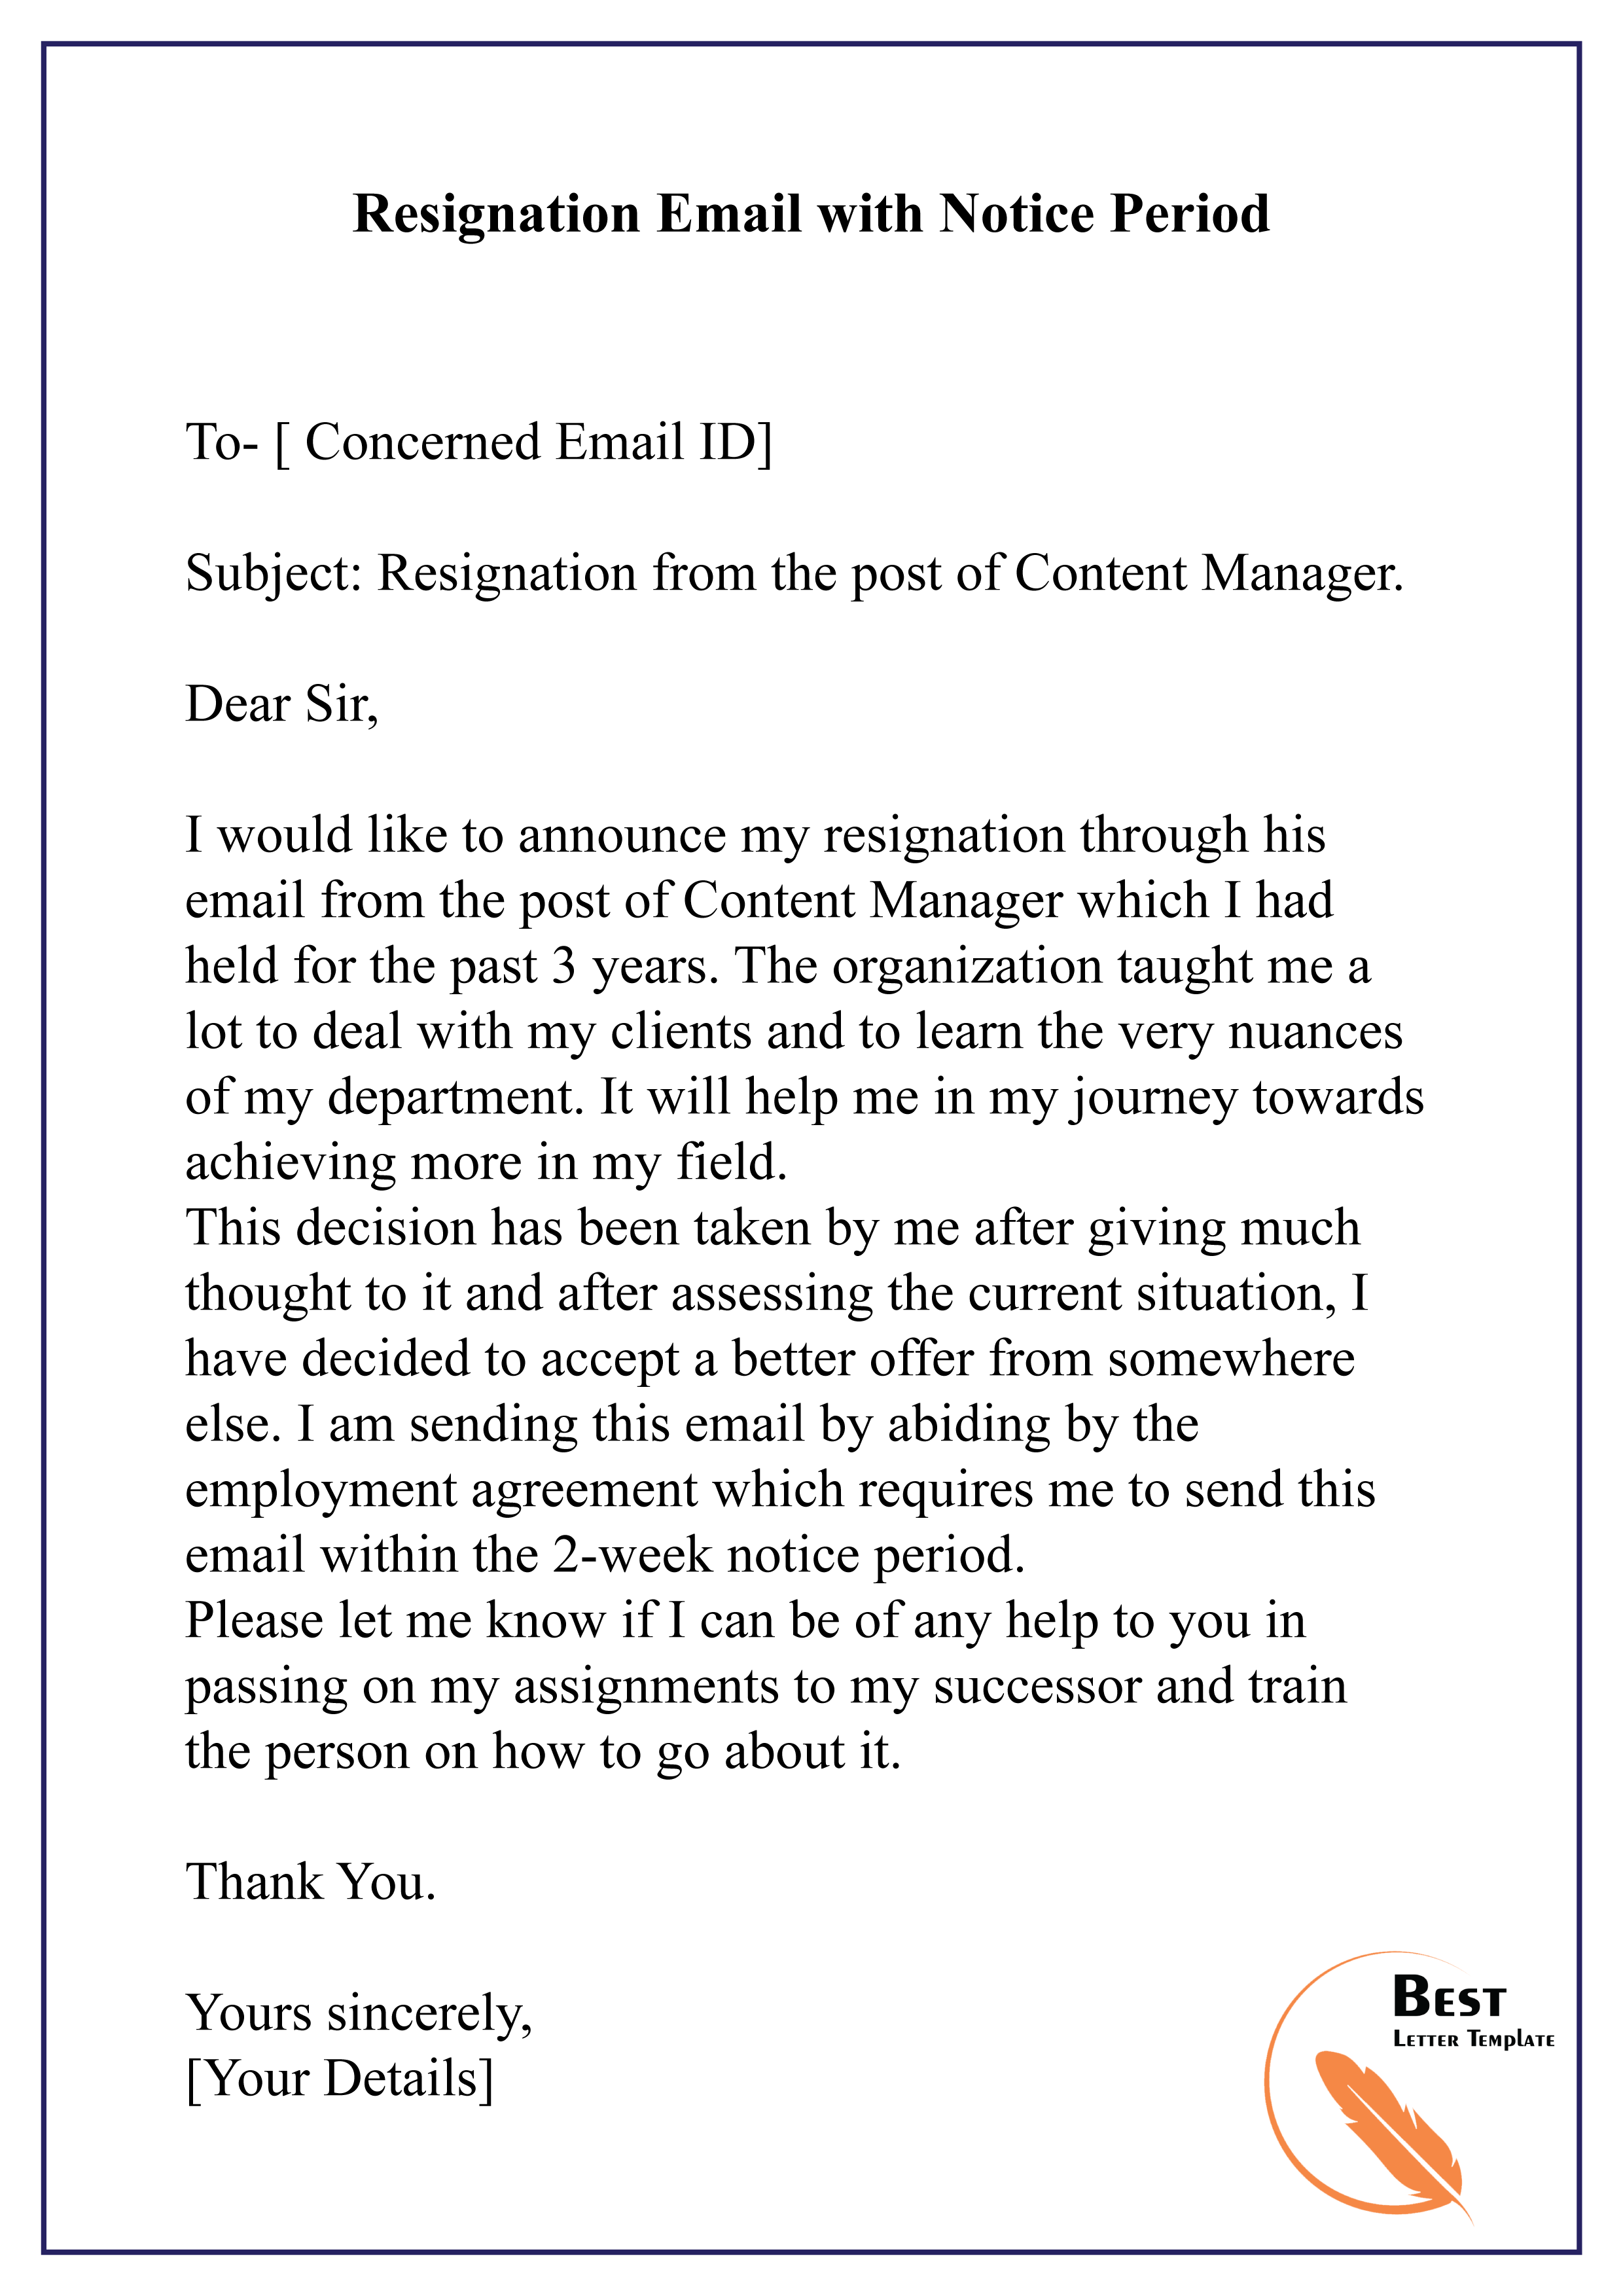 Resignation Email with Notice Period